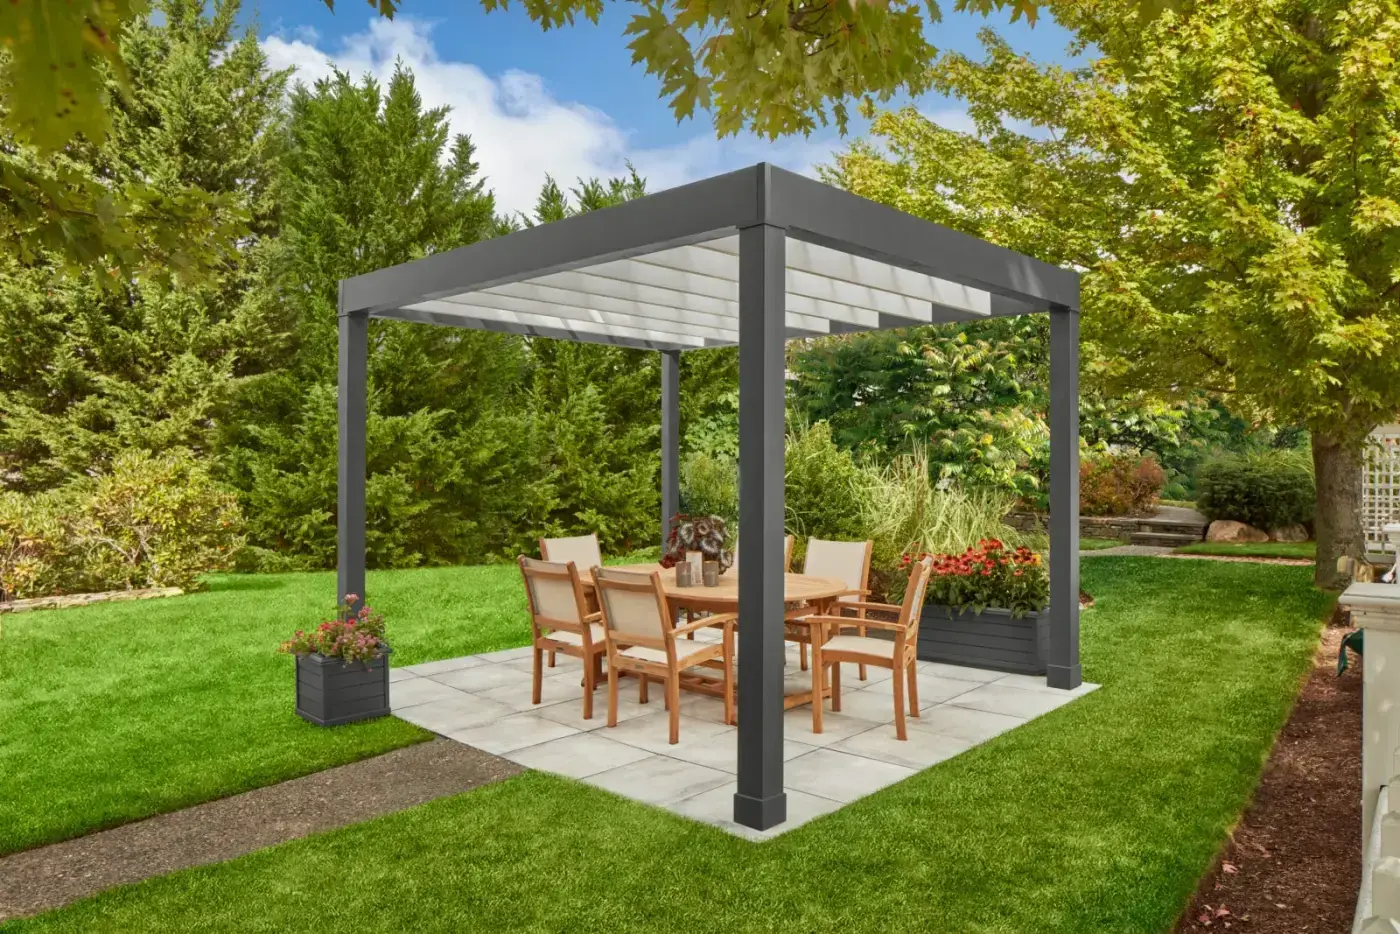 Create your own contemporary outdoor living space with the freestanding Lockhart Pergola. Crafted in solid cellular vinyl, square columns have a top trim and end with base kickplate. Factory finished in Iron Ore with Sherwin-Williams Super Paint and carries a 25-year warranty.